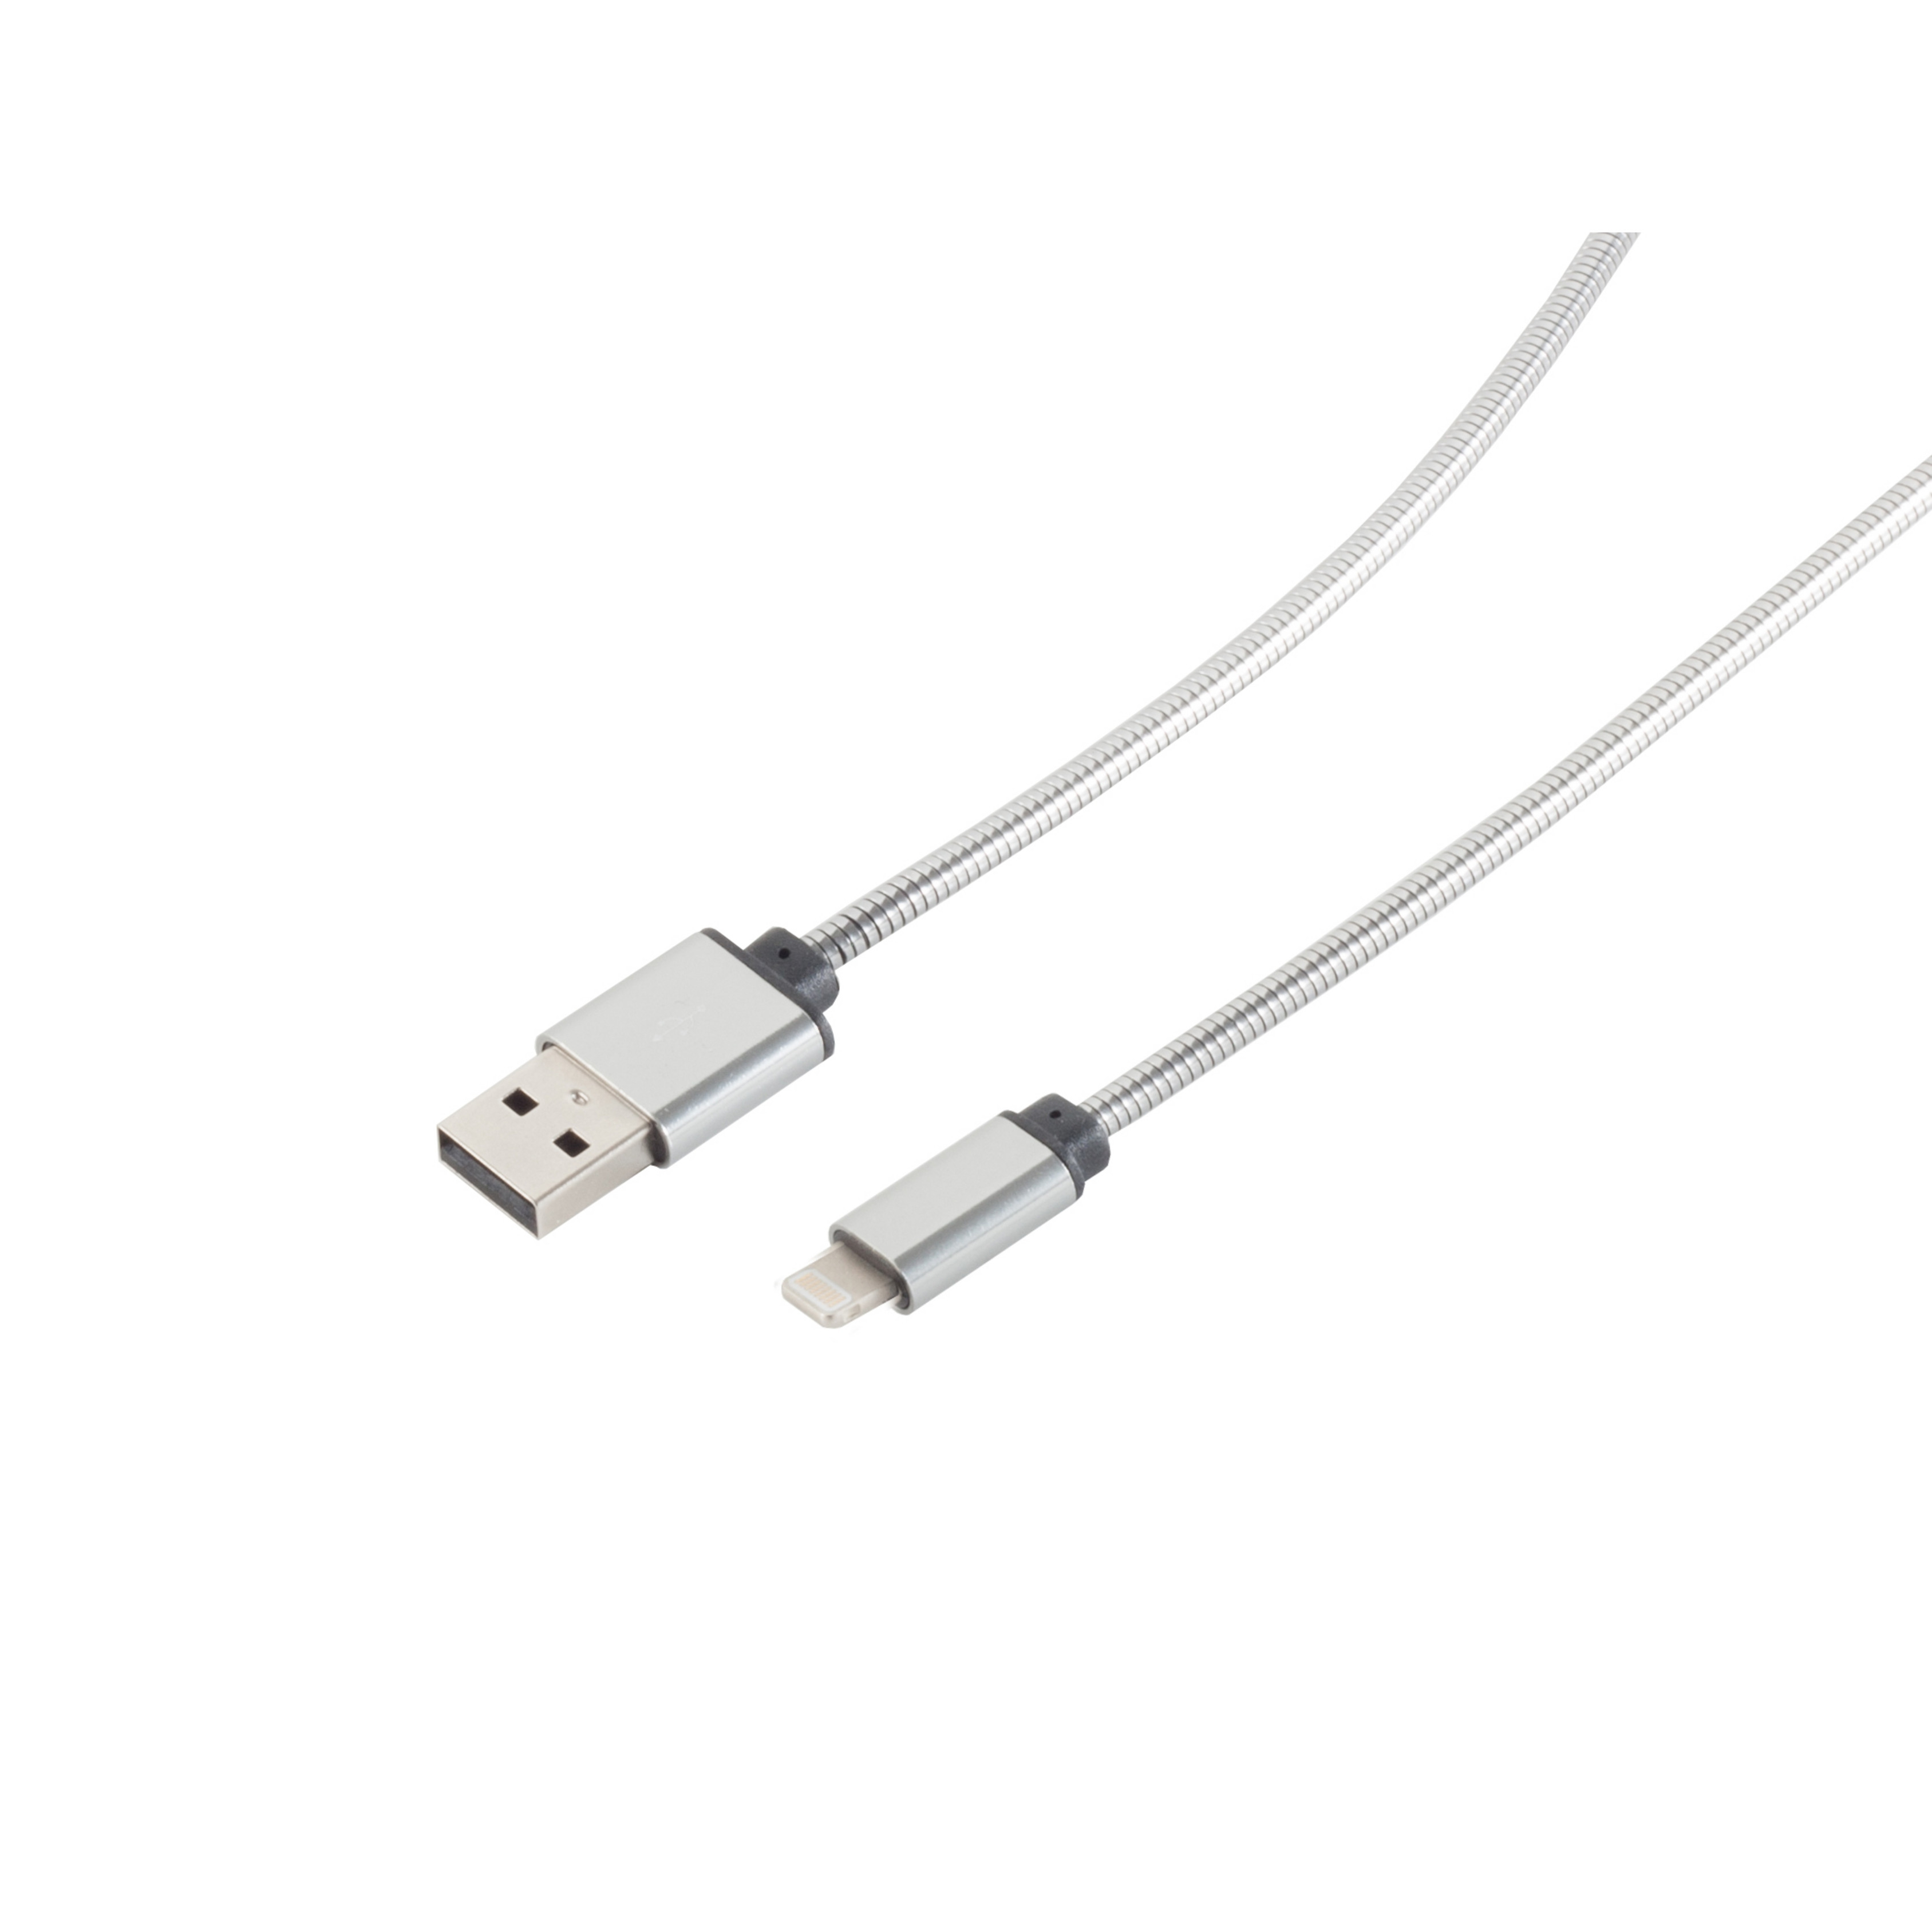 USB A/ Kabel 8-pin CONNECTIVITY Lade-Sync MAXIMUM Kabel 1,6m S/CONN Silber USB USB Steel